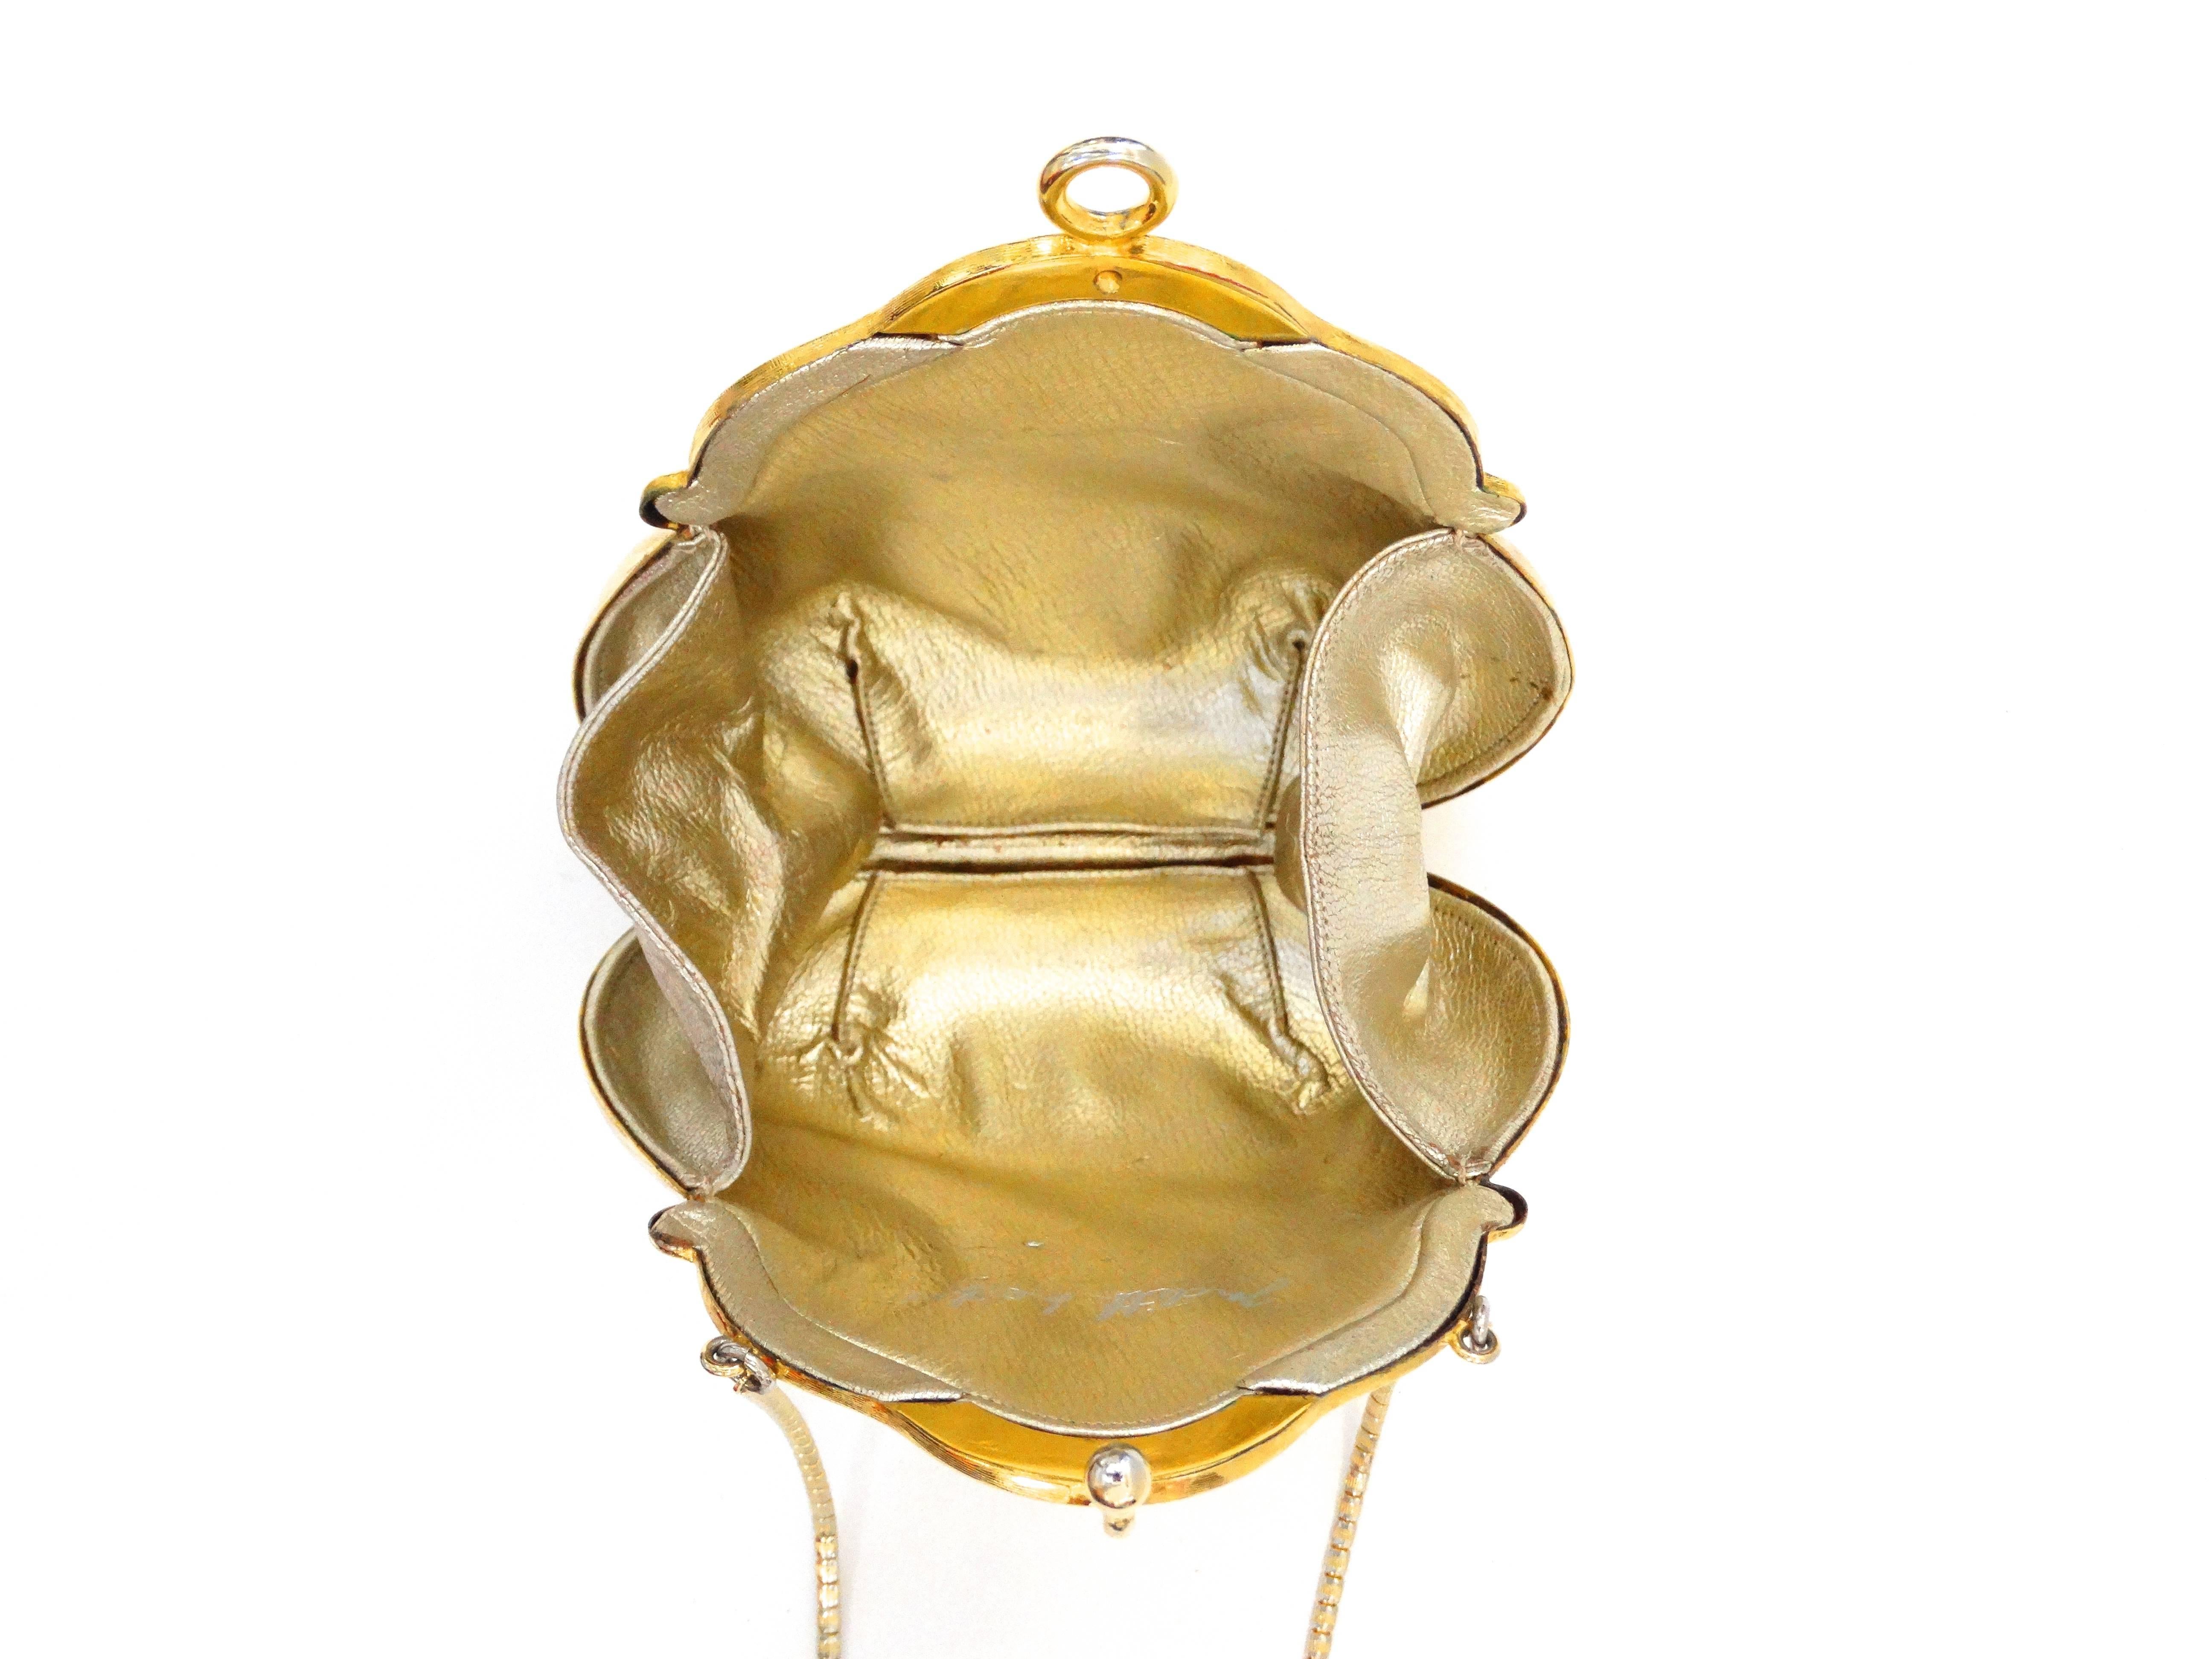 Up your evening bag game with our Judith Leiber Chatelaine purse designed 1967! Brushed gold metal in shell inspired silhouette. Shell style clasp snaps open to reveal leather lined interior. Matching thin gold strap. Signed Judith Leiber on the